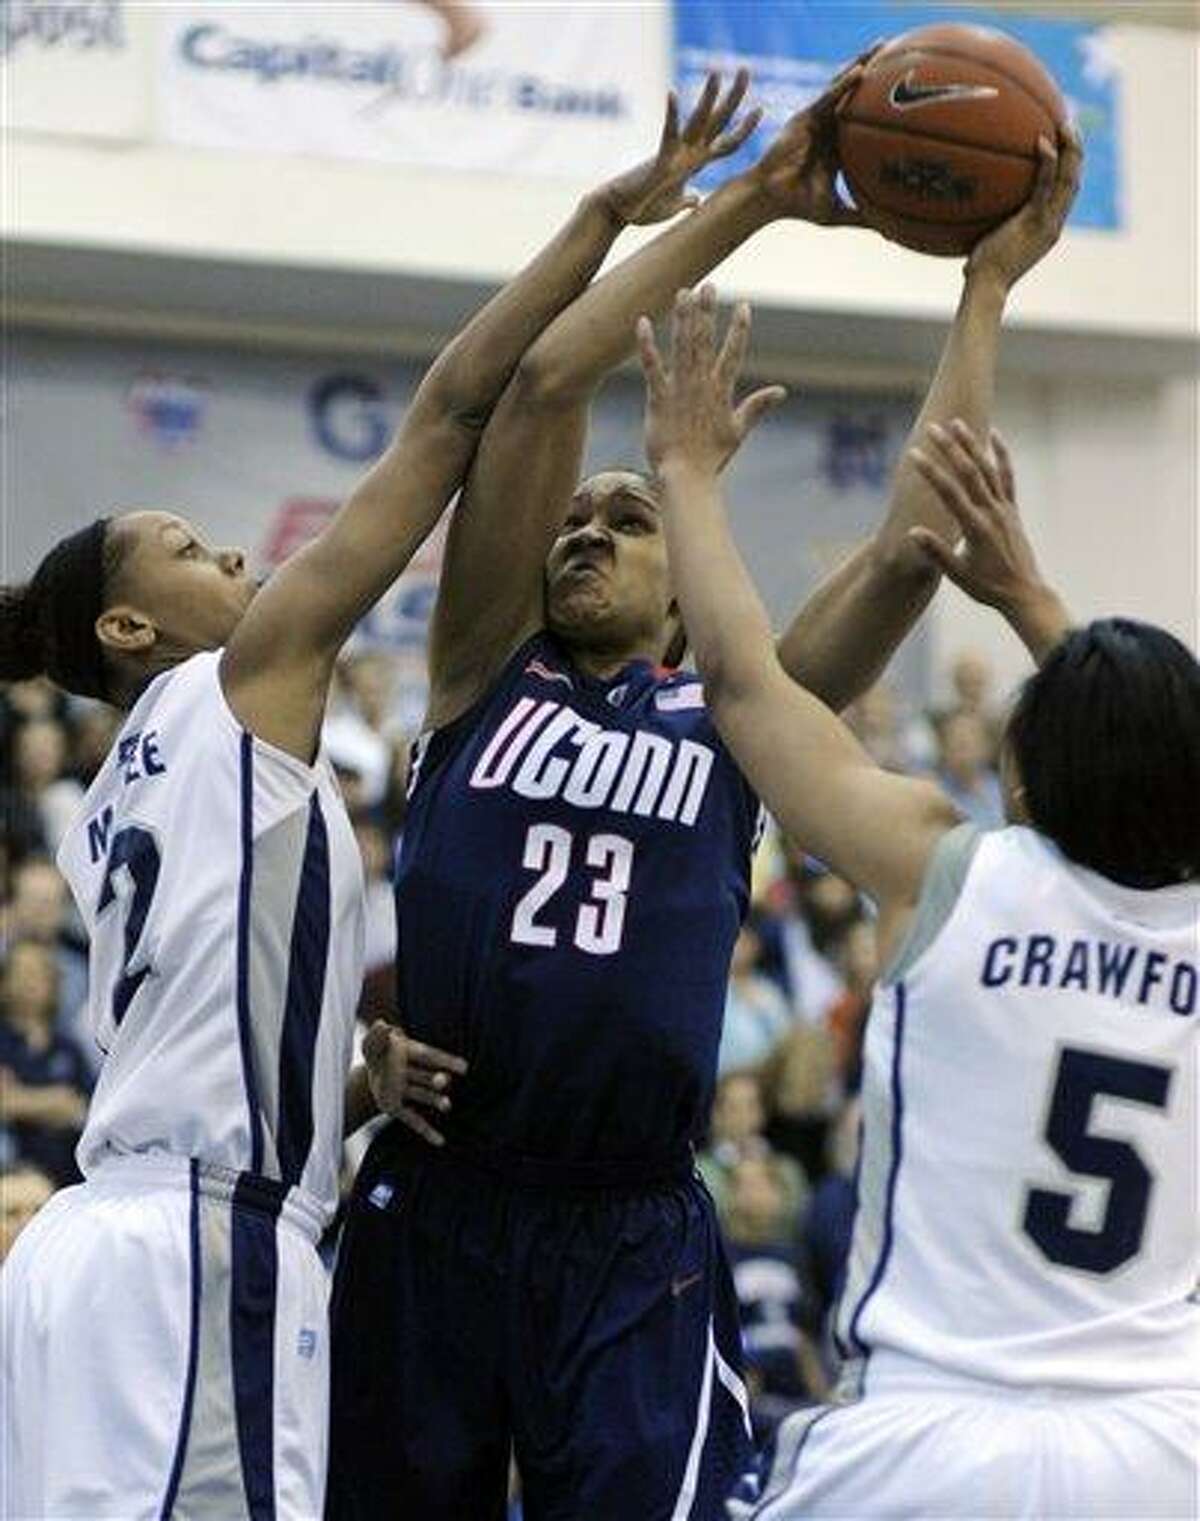 Connecticut forward Maya Moore, 23, center, is tied-up by Georgetown forwards Tia Magee, 2, left, and Adria Crawford during the first period of their Big East game in Washington, Saturday, Feb. 26, 2011. (AP Photo/Cliff Owen)